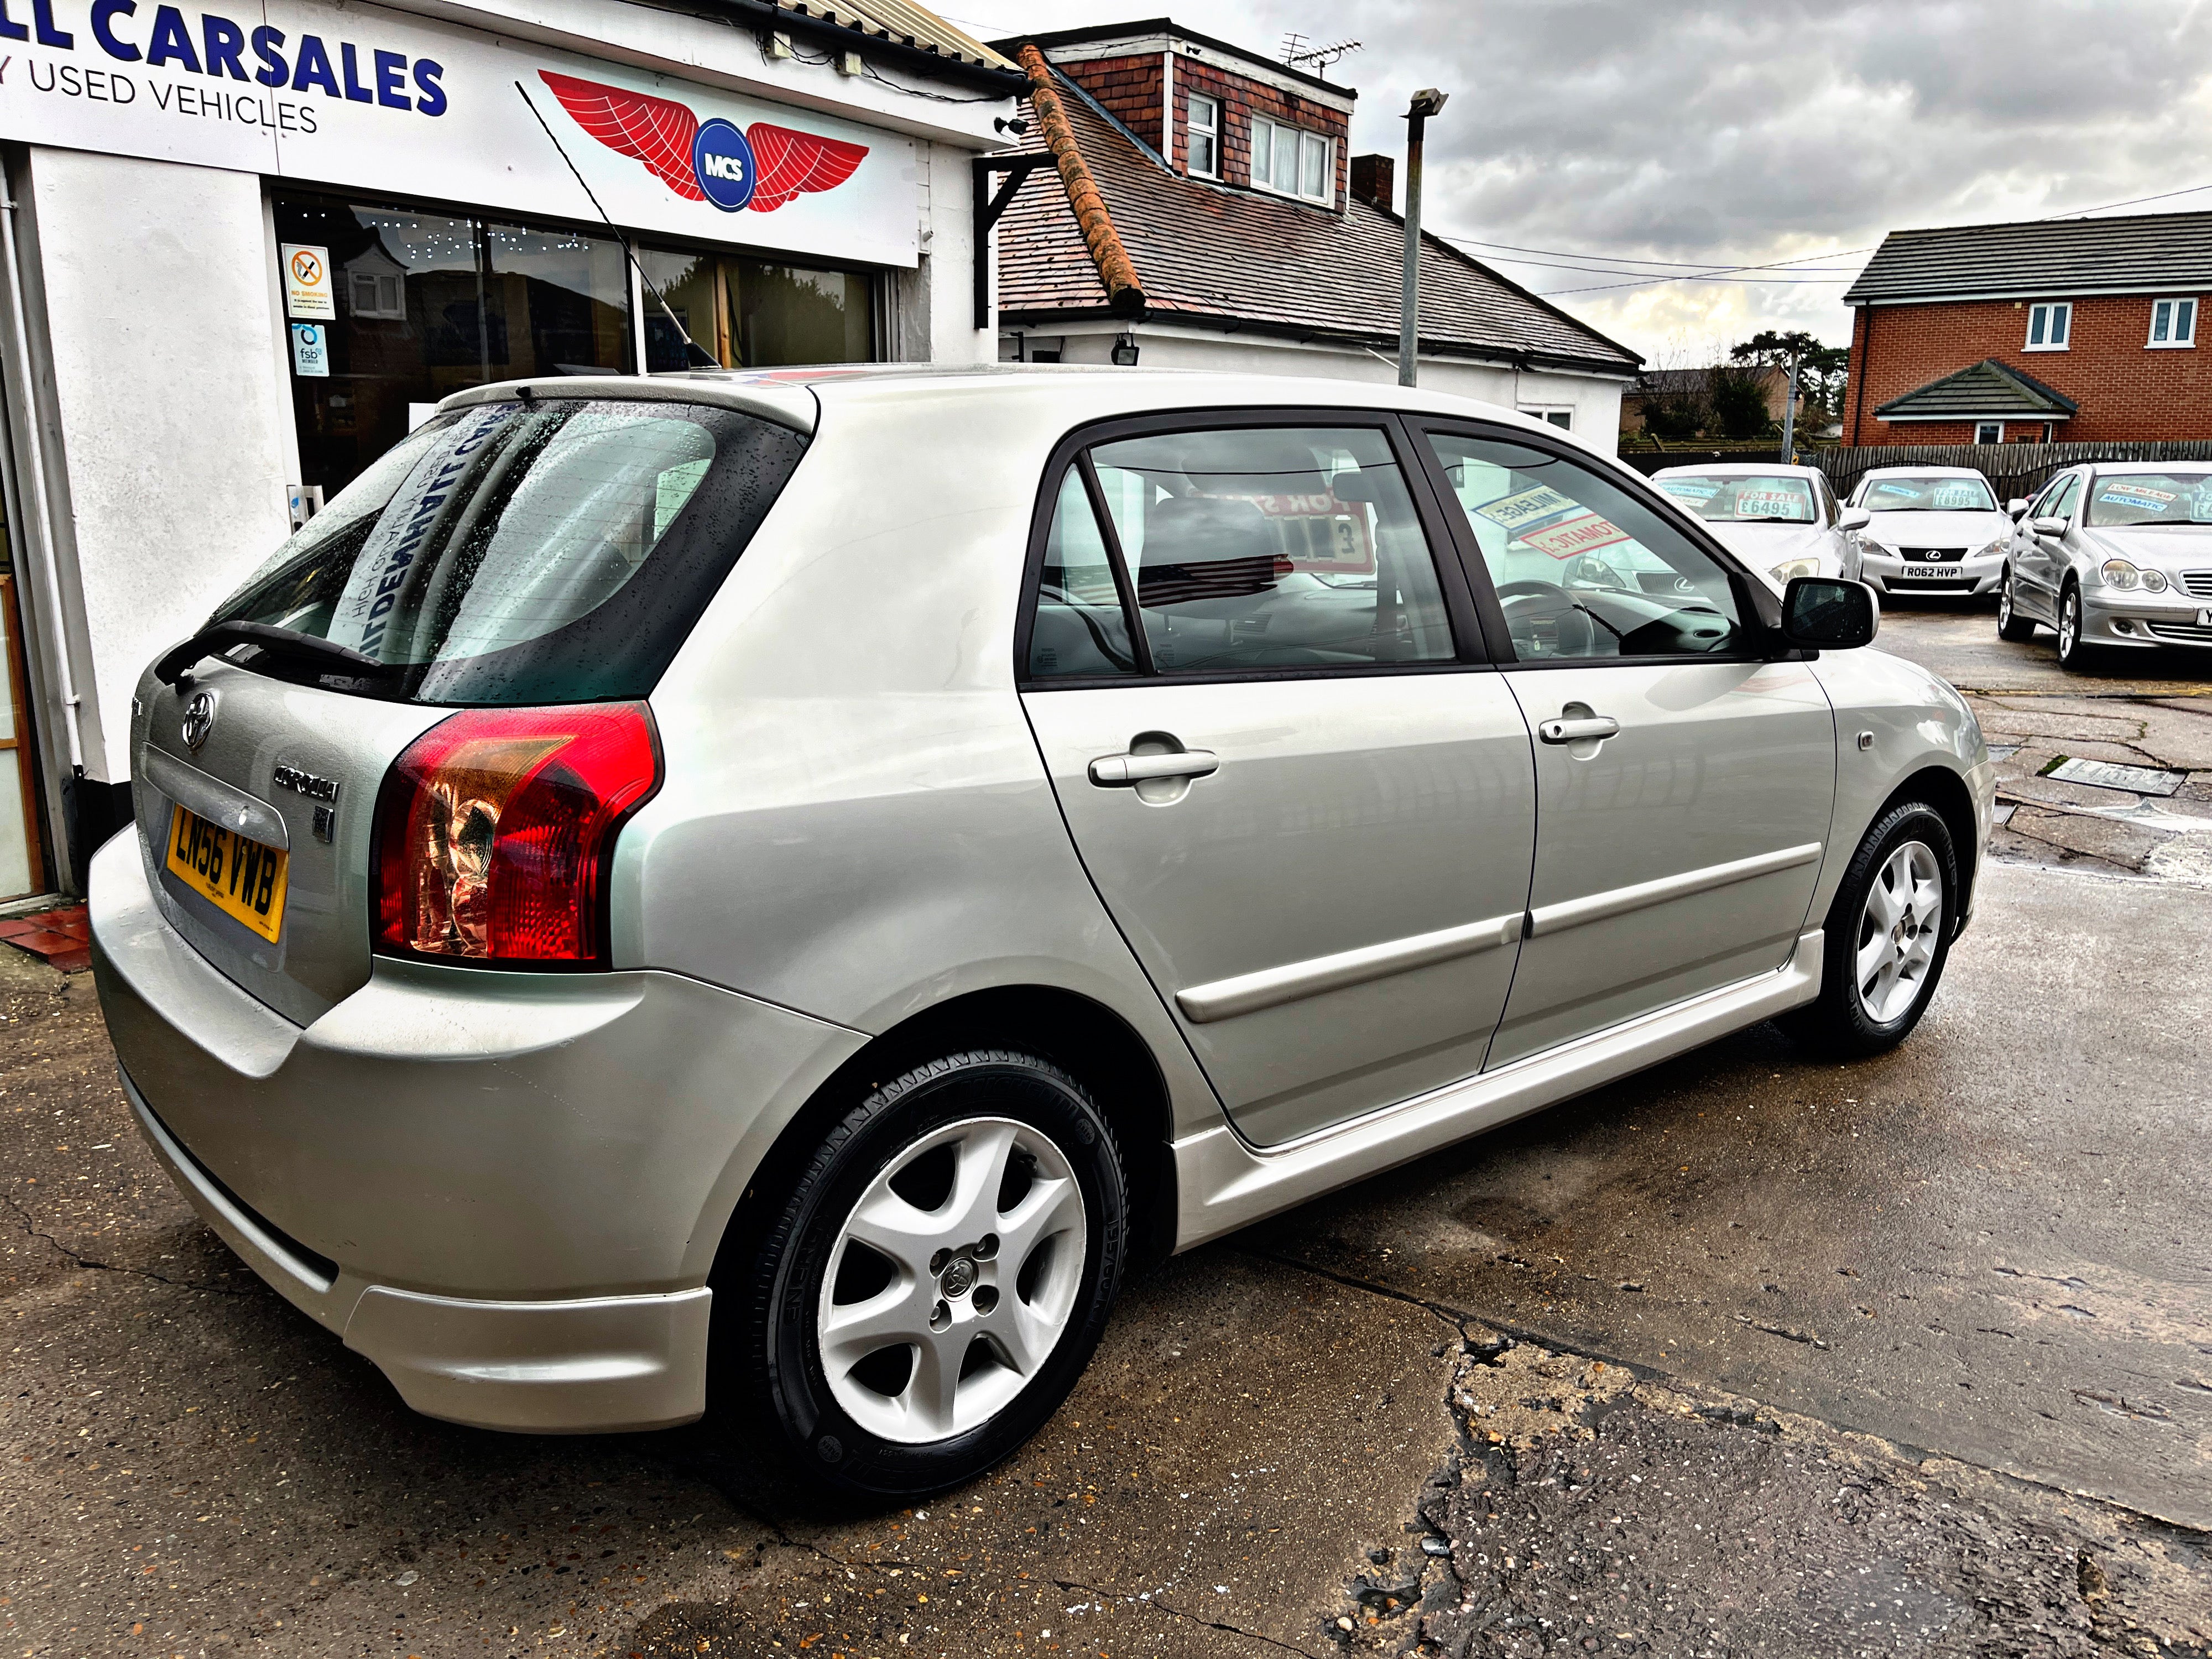 Toyota Corolla 1.6 Automatic LOW MILES!!.. 1 OWNER!!